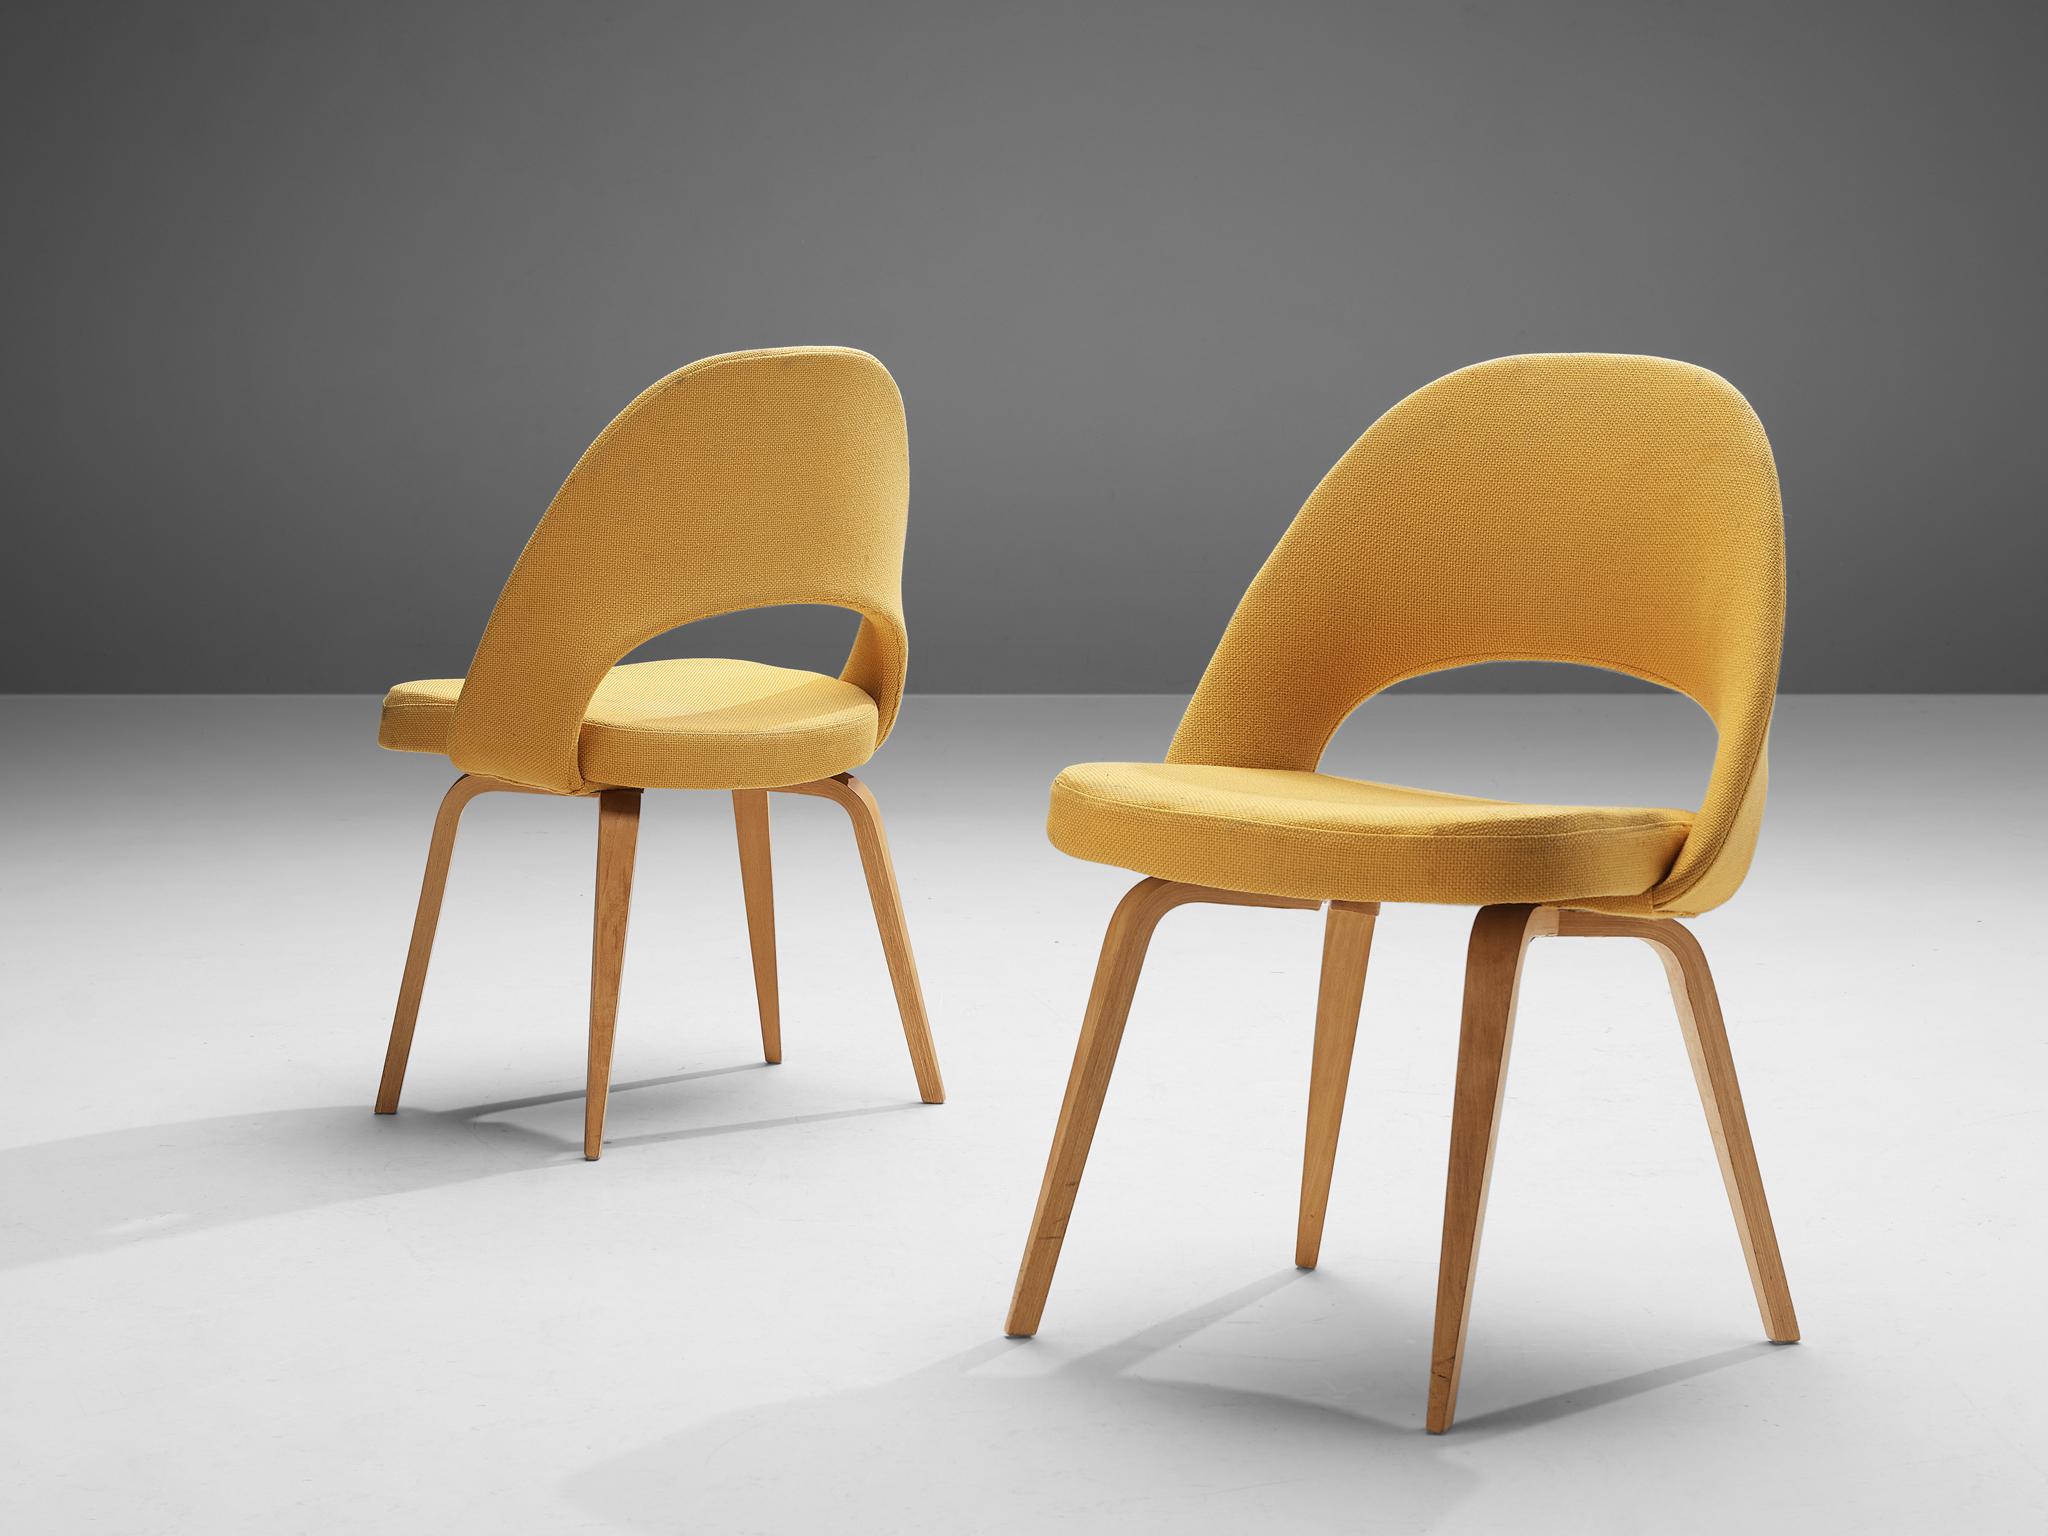 Eero Saarinen for Knoll International, pair of model 72 chairs, in wood and yellow fabric, United States, design 1948

Pair of organic shaped chairs designed by Eero Saarinen. A fluid, sculptural form. This timeless and versatile design continues to